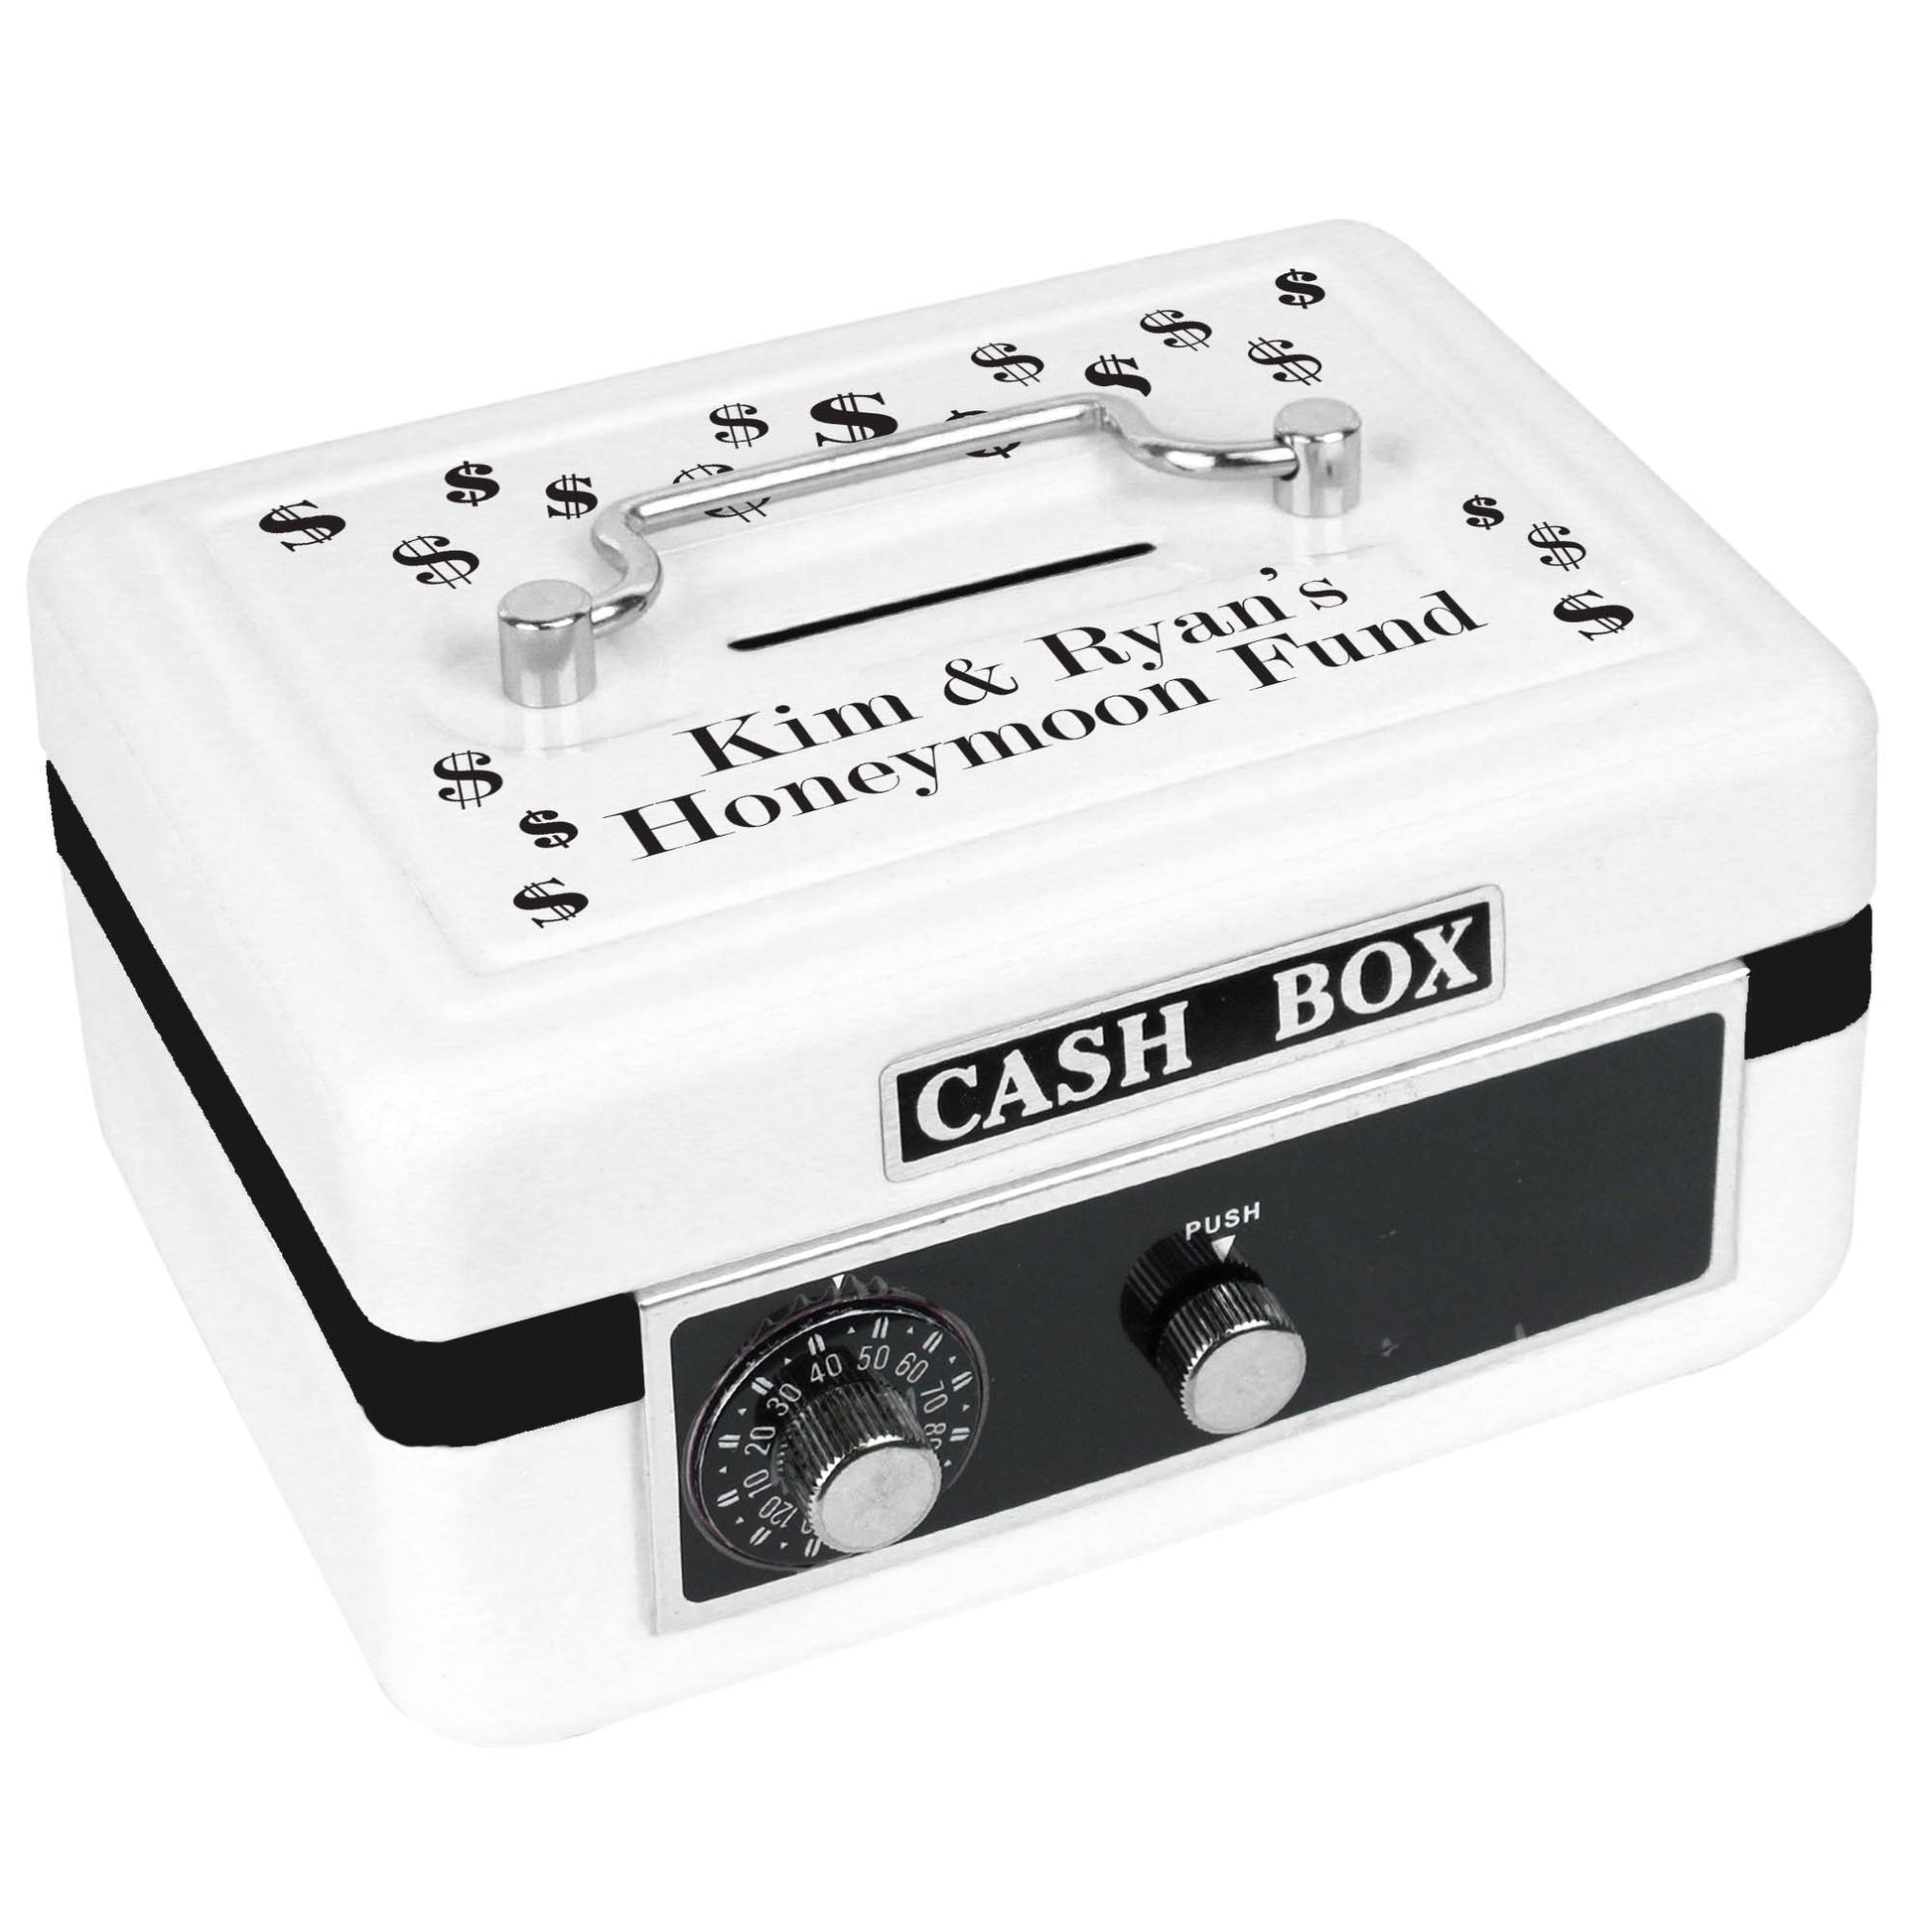 Personalized White Cash Box with Dollar Signs Black design